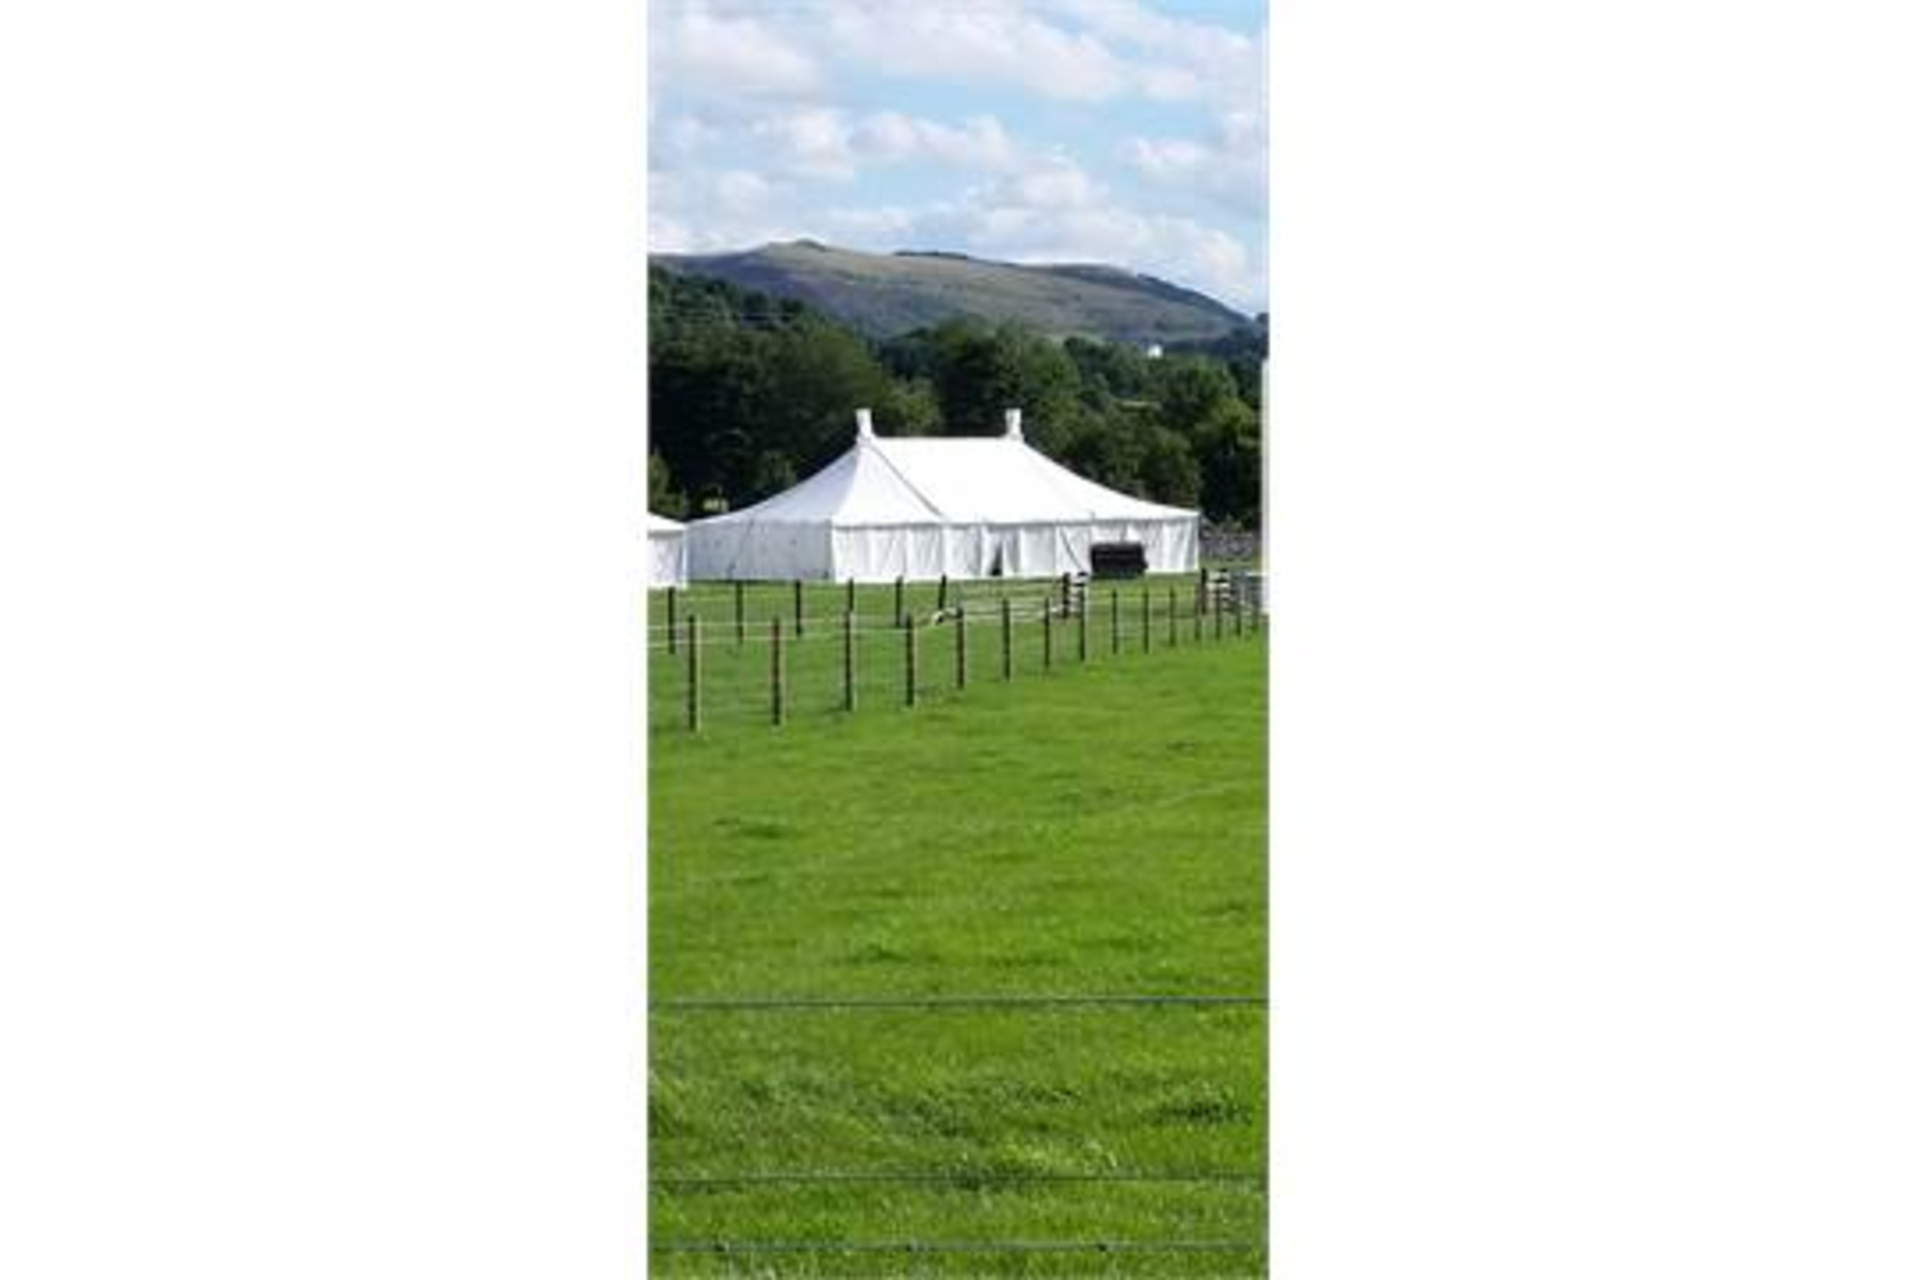 Traditional Events Marquee 30ft x 50ft – NO VAT Manufactured by Wetherill Bro's 2009 Fire Rating BSA